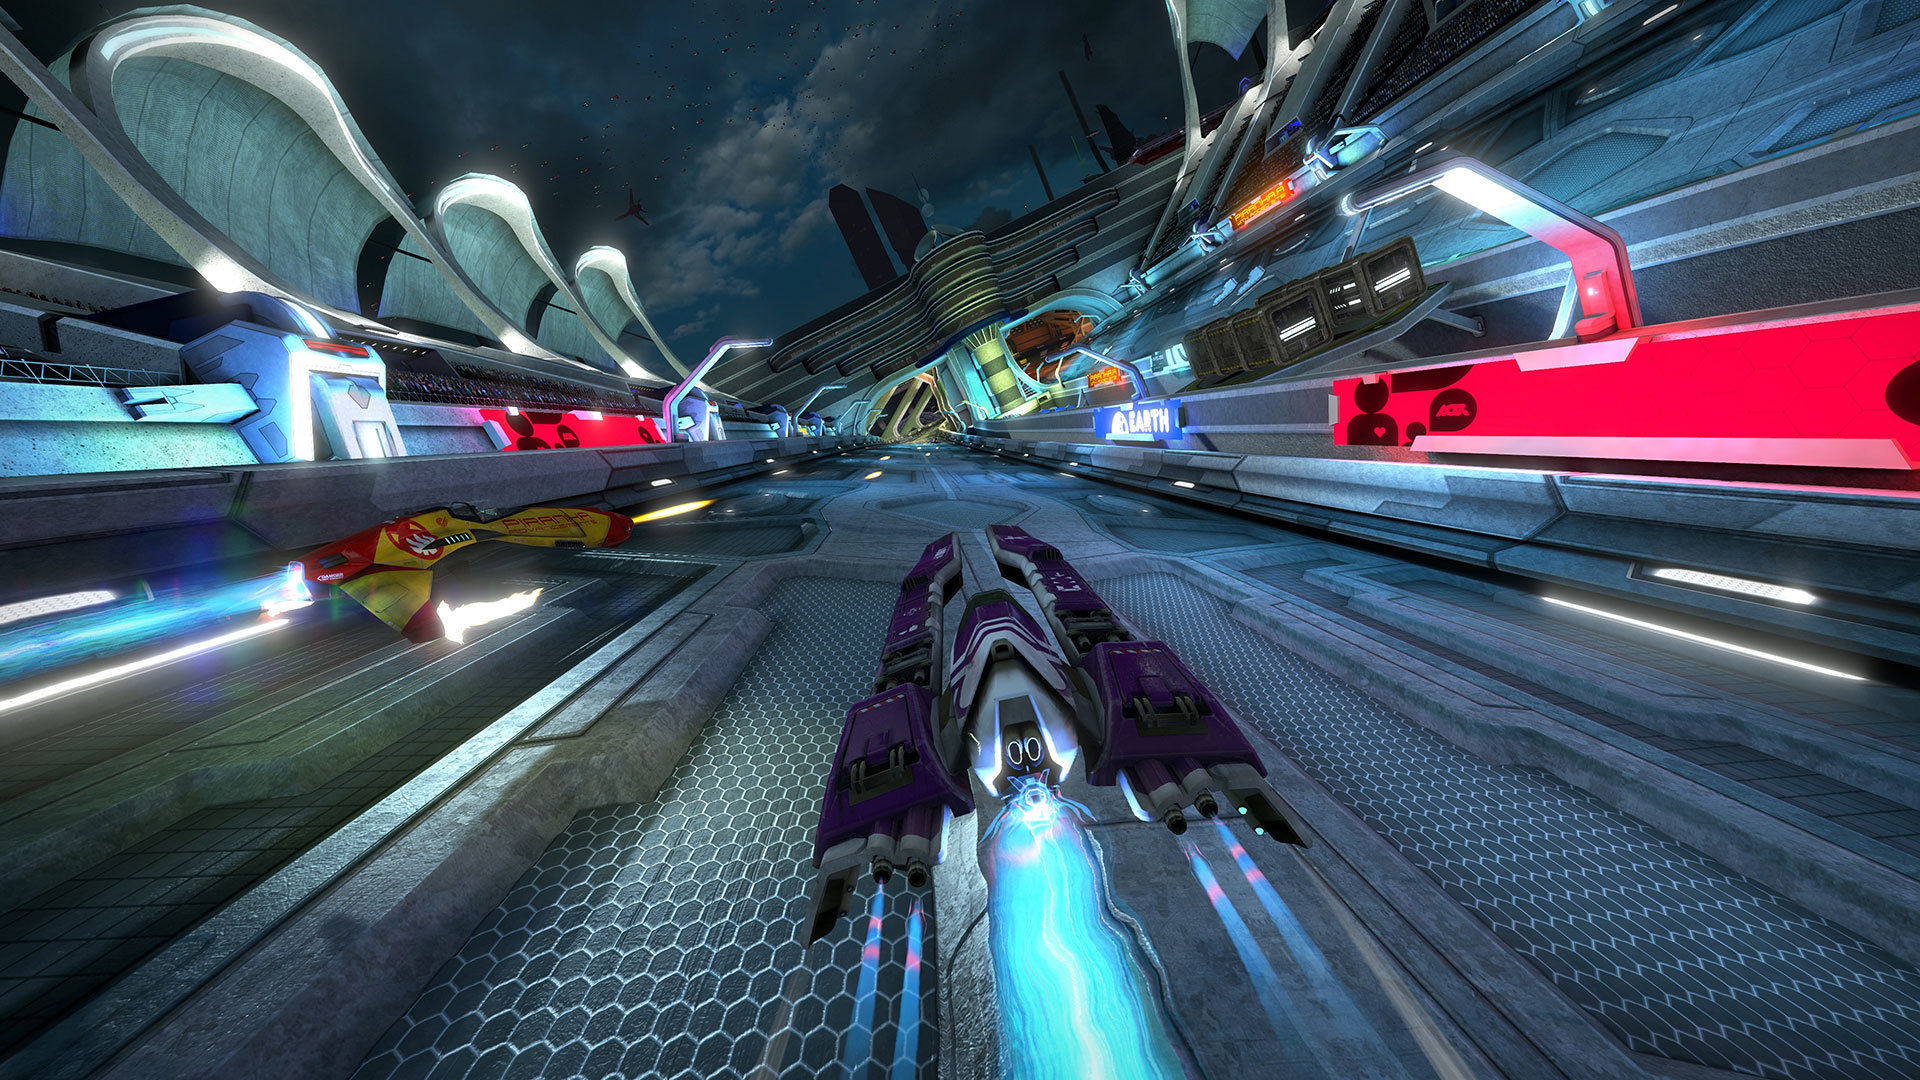 Media asset in full size related to 3dfxzone.it news item entitled as follows: Wipeout Omega Collection: Sony pubblica trailer, screenshots e data di lancio | Image Name: news26090_Wipeout-Omega-Collection_3.jpg